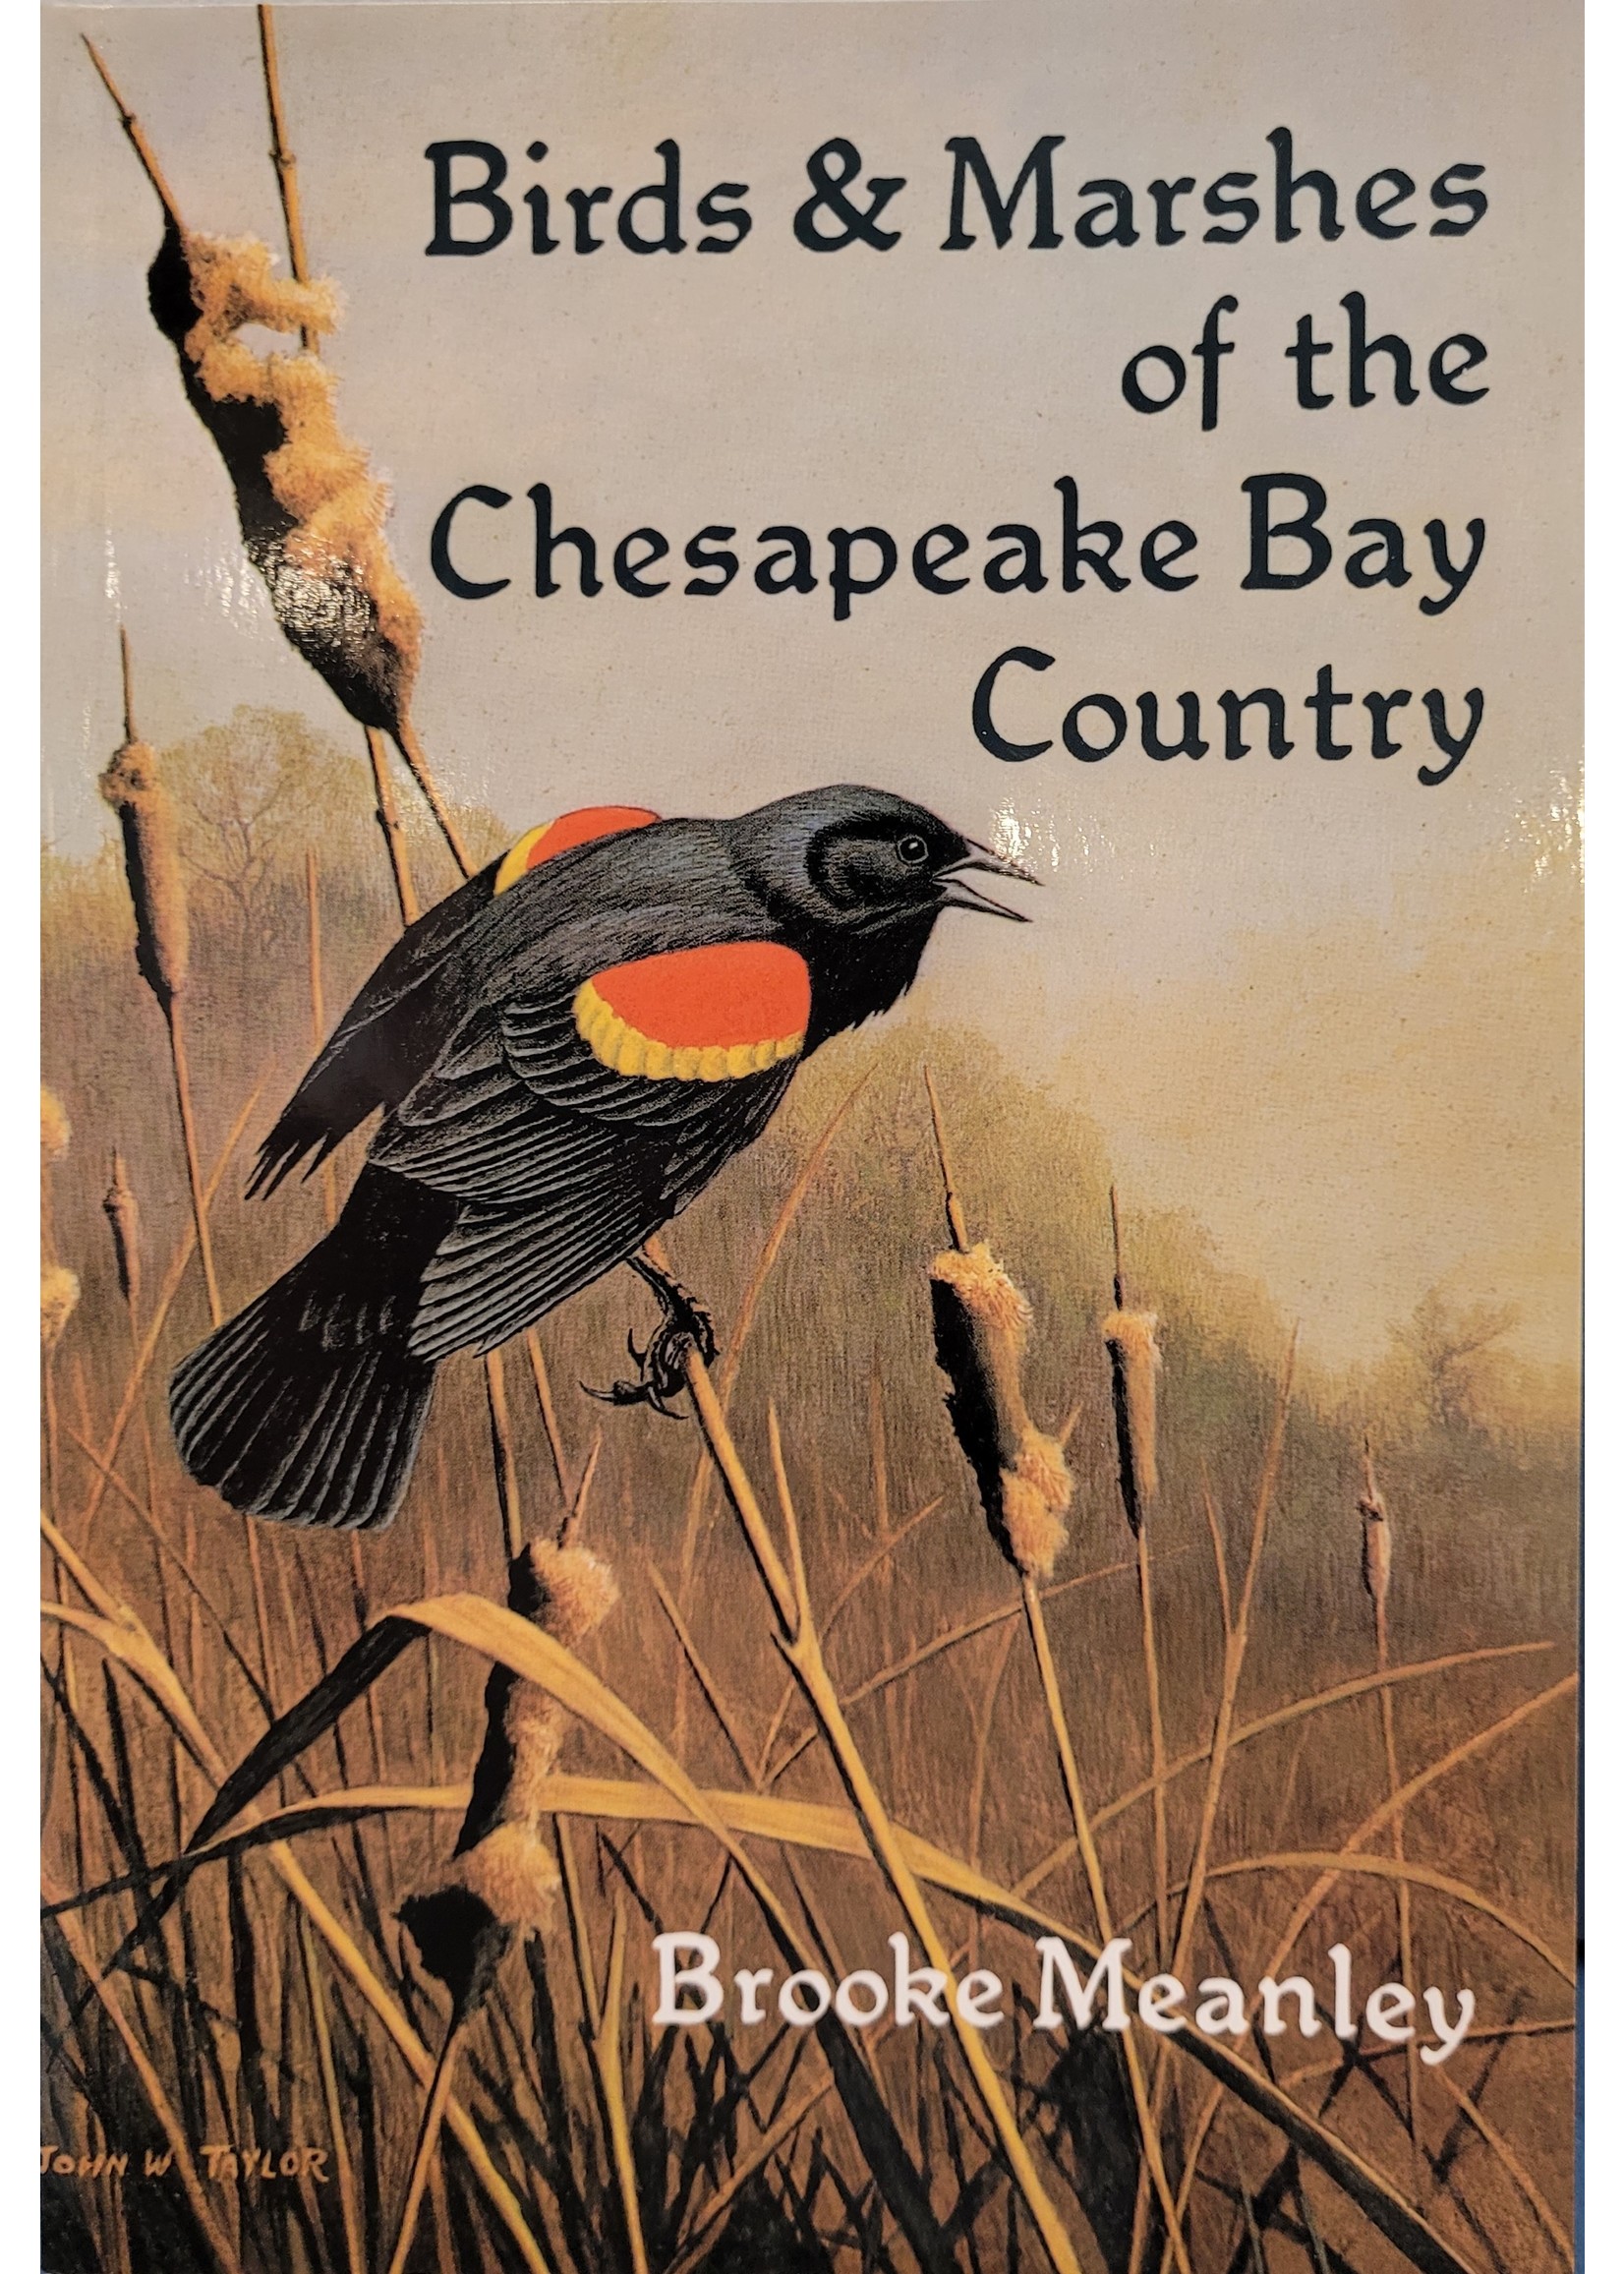 Birds & Marshes of the Chesapeake Bay Country